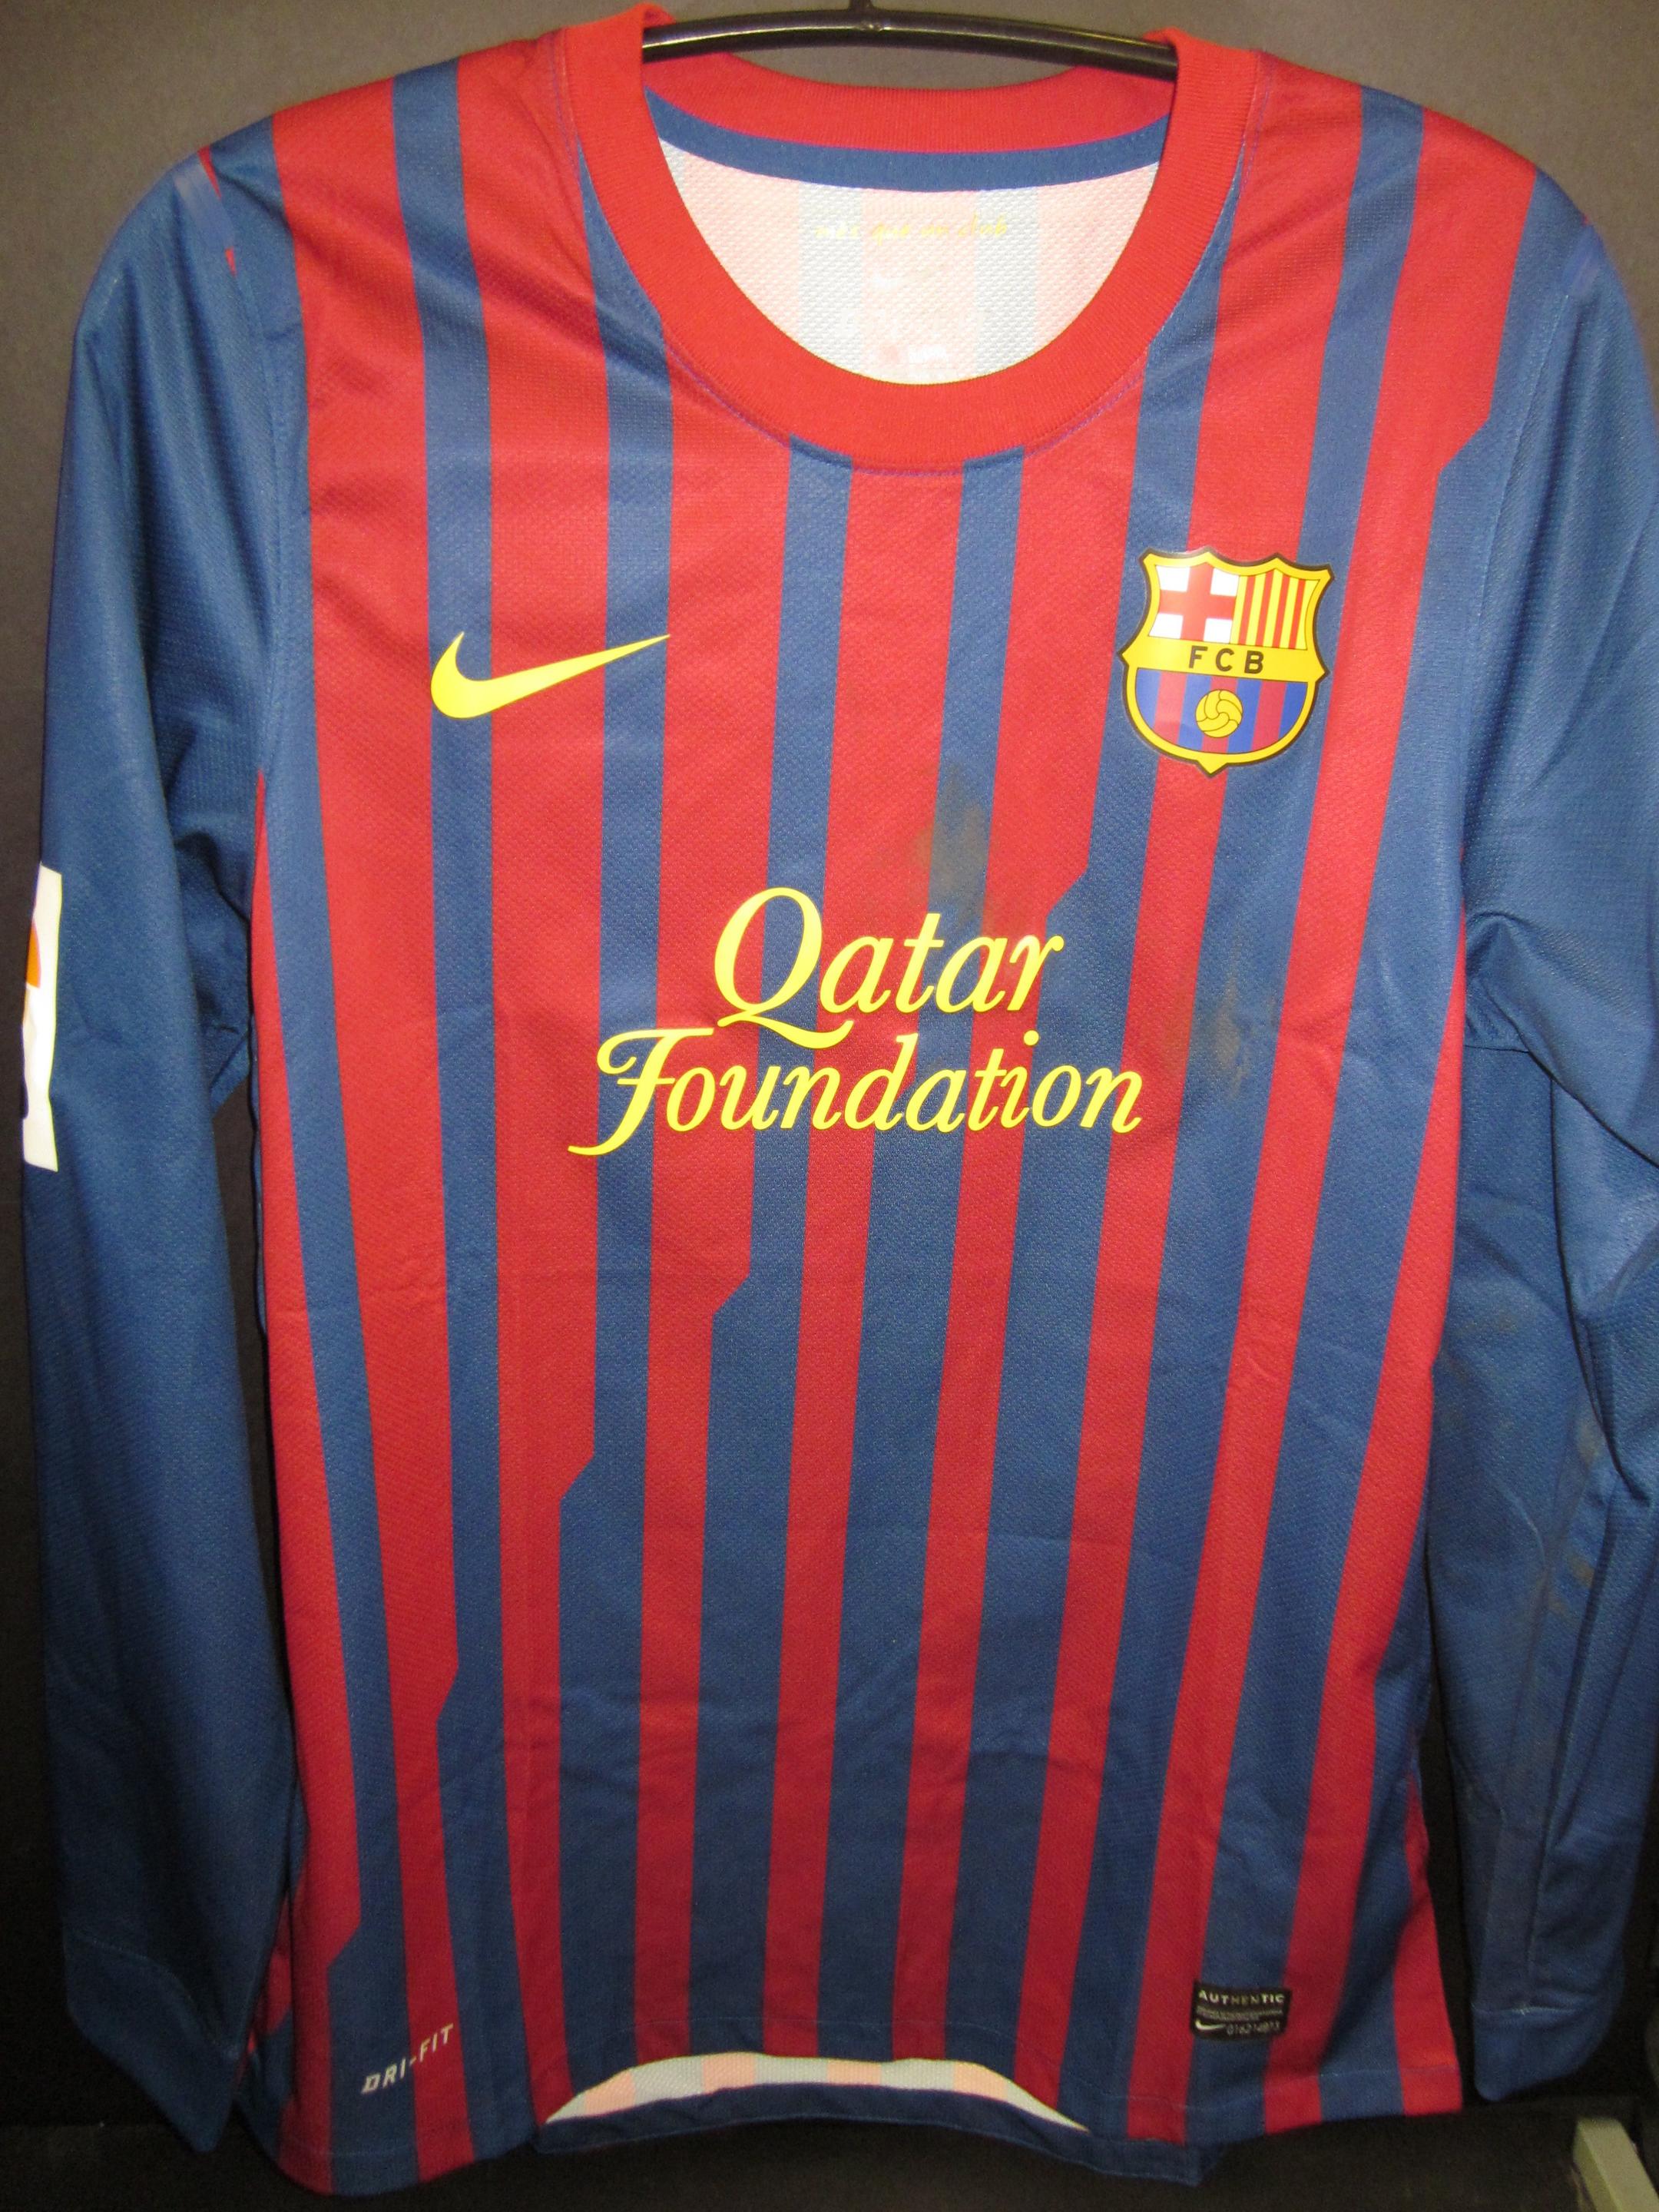 Barcelona: The enormous sum Messi's 500-goal shirt sold for at auction